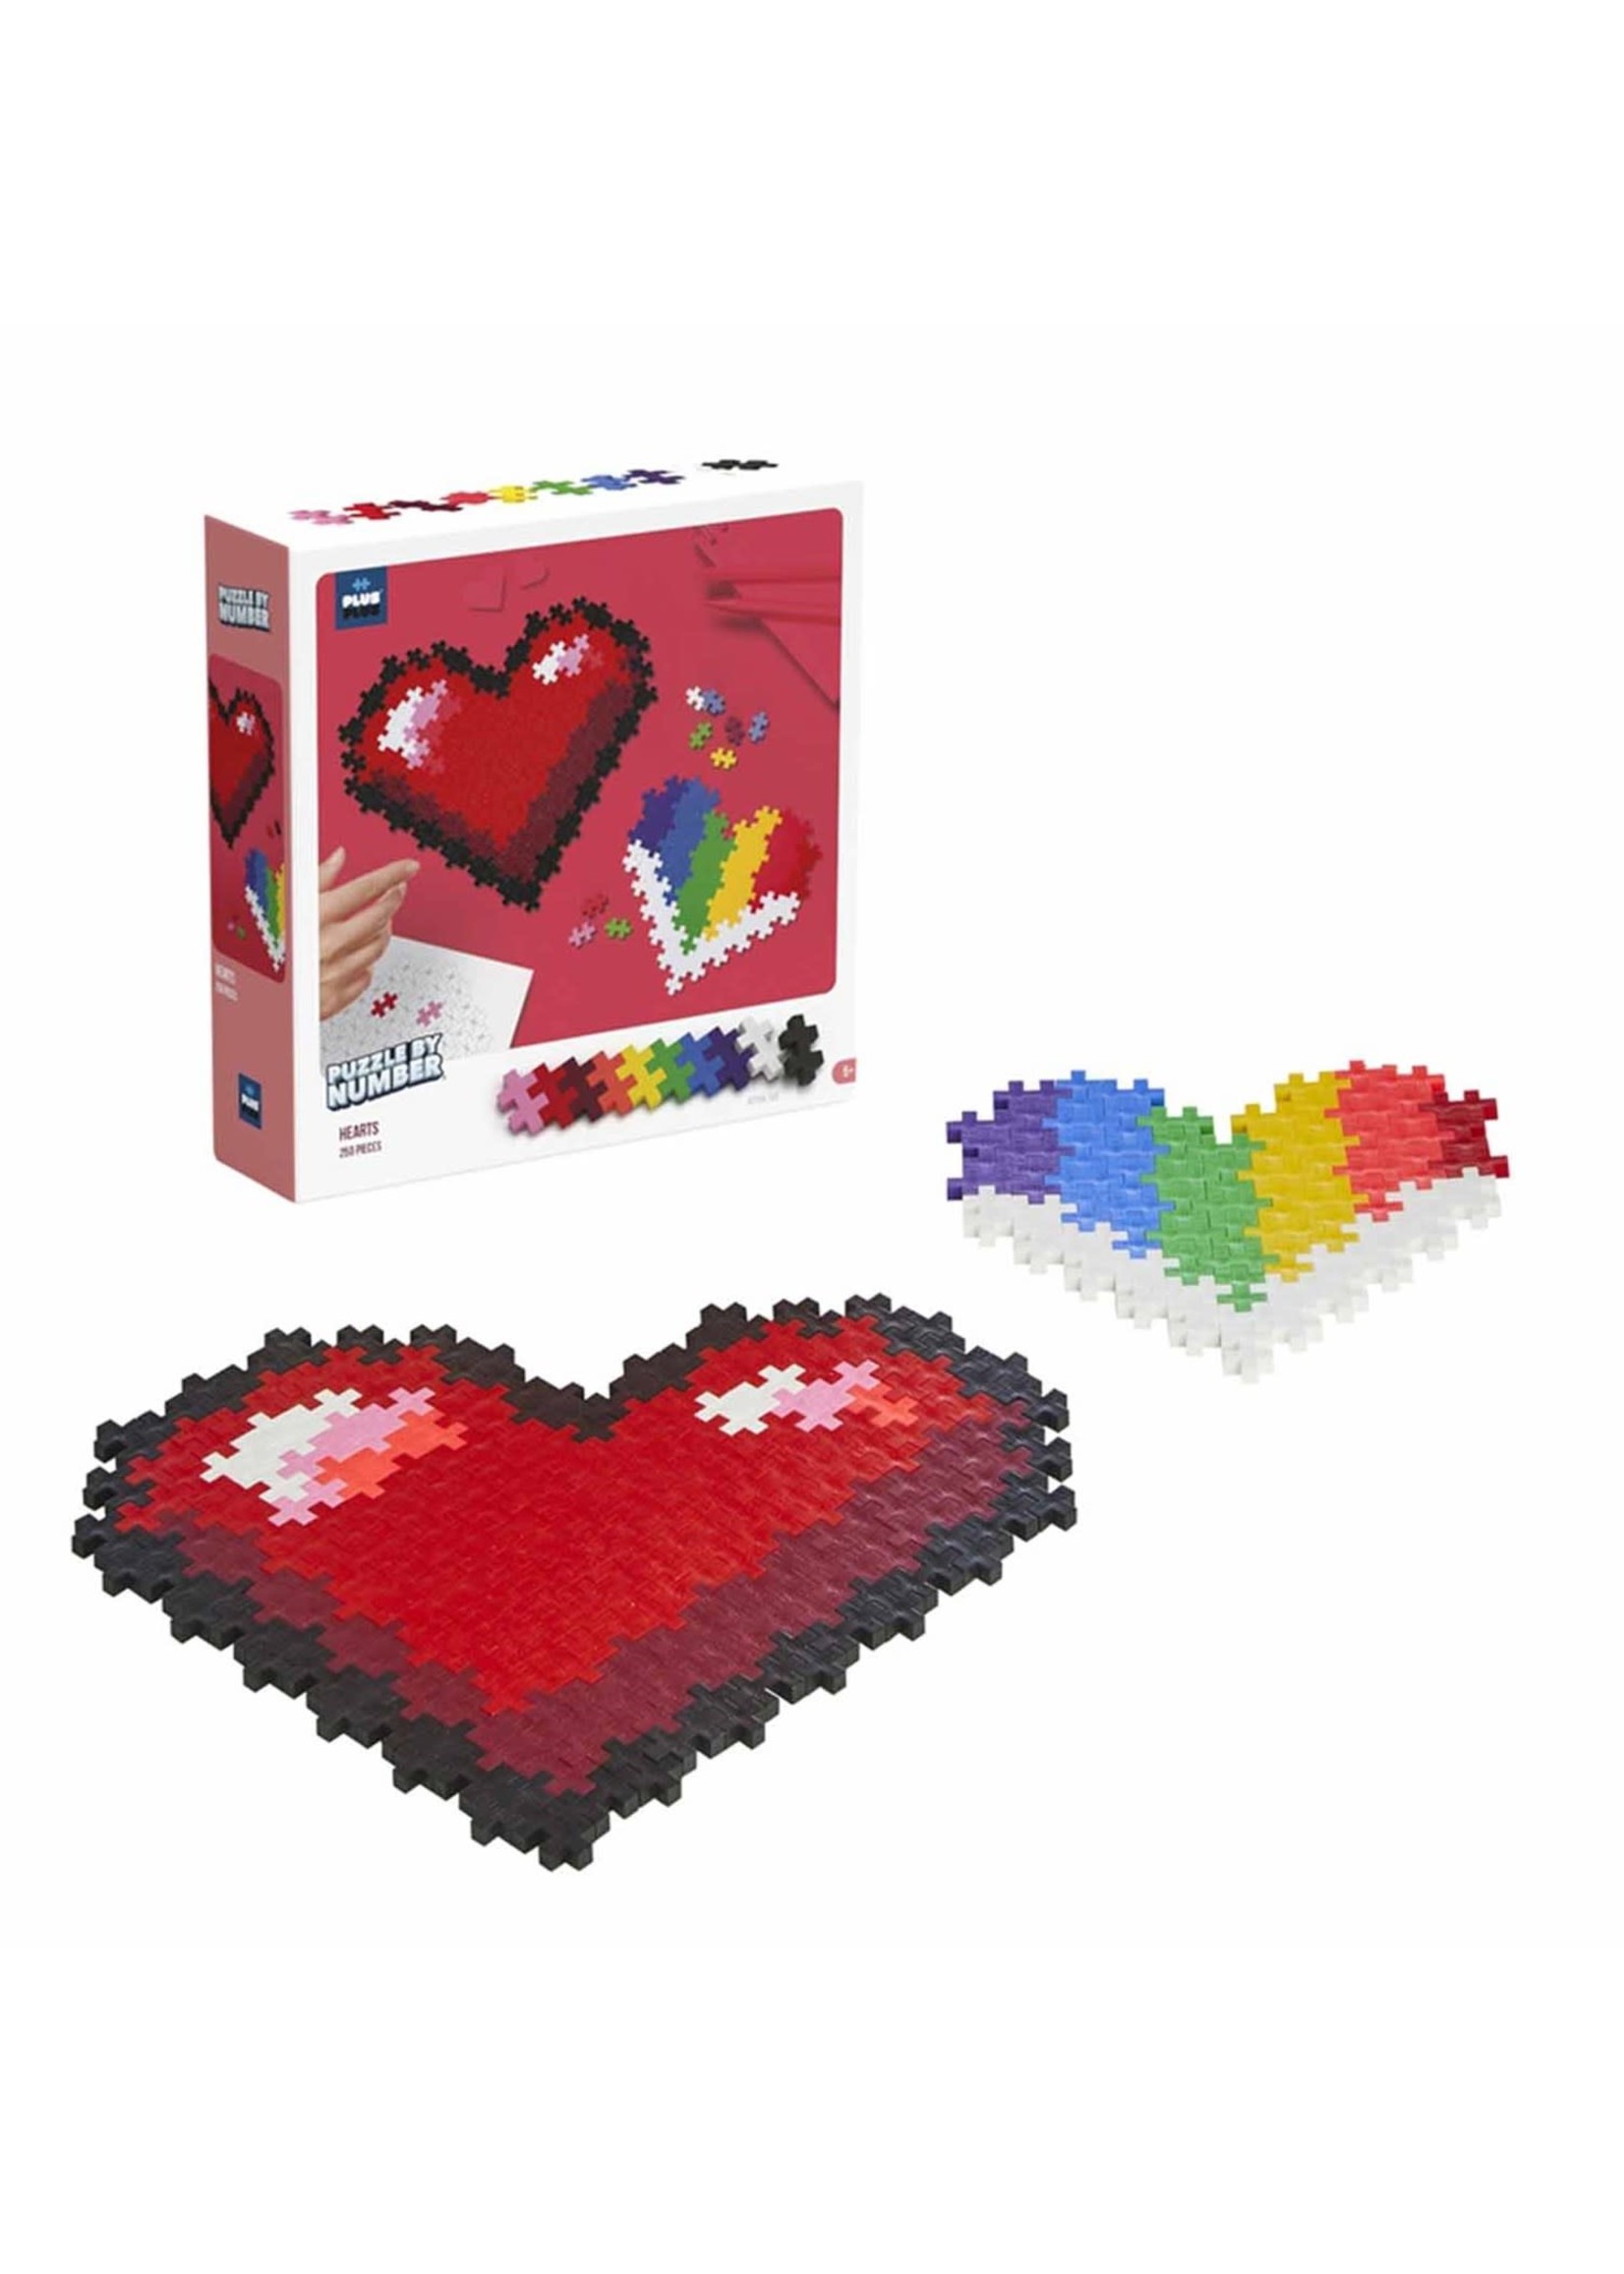 Puzzle by Number 250 pc Hearts